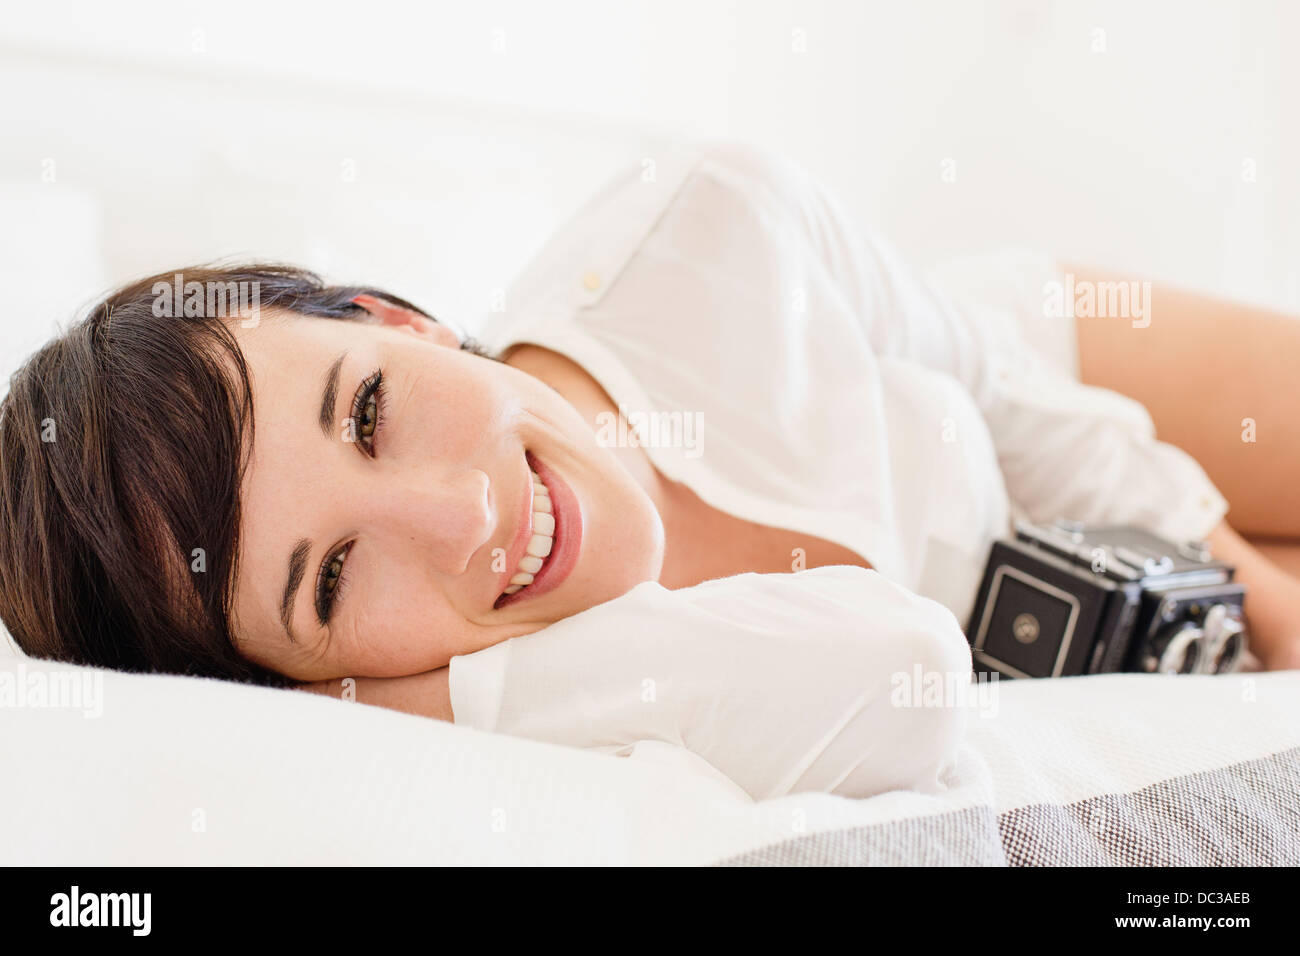 Portrait of smiling woman with vintage camera in bed Stock Photo